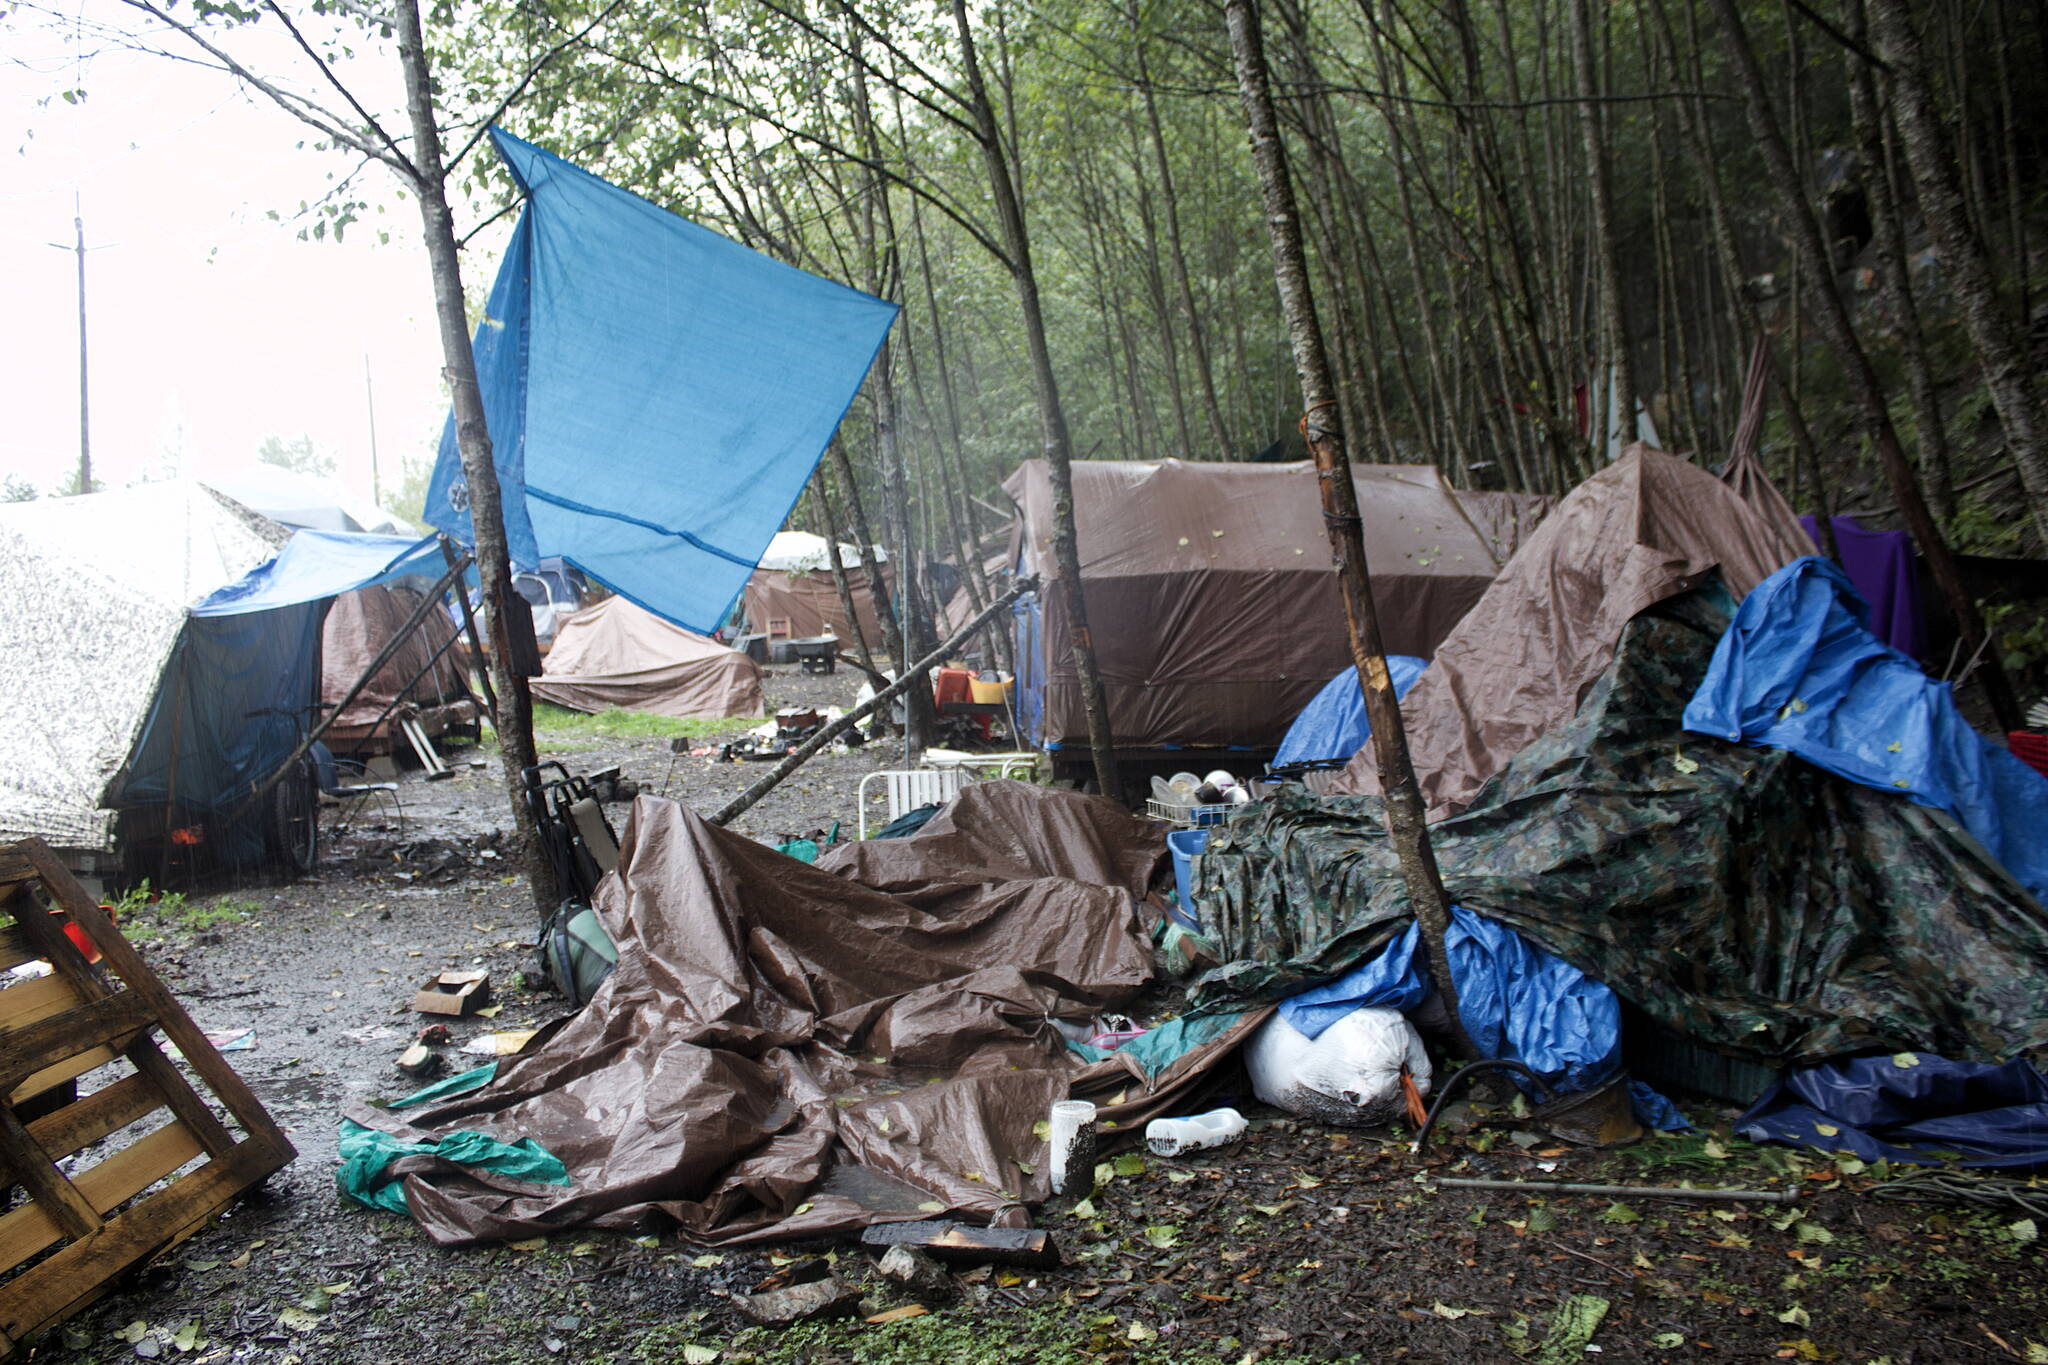 Trash, debris and abandoned belongings are strewn among occupied tents at the Mill Campground on the mountainside across from the cargo ship terminal in downtown Juneau on Monday. The campsite has been at or beyond full capacity through the summer, as have other facilities for the homeless, due to various problems including skyrocketing housing costs and lack of vacancies even for people able to pay at least some rent. (Mark Sabbatini / Juneau Empire)